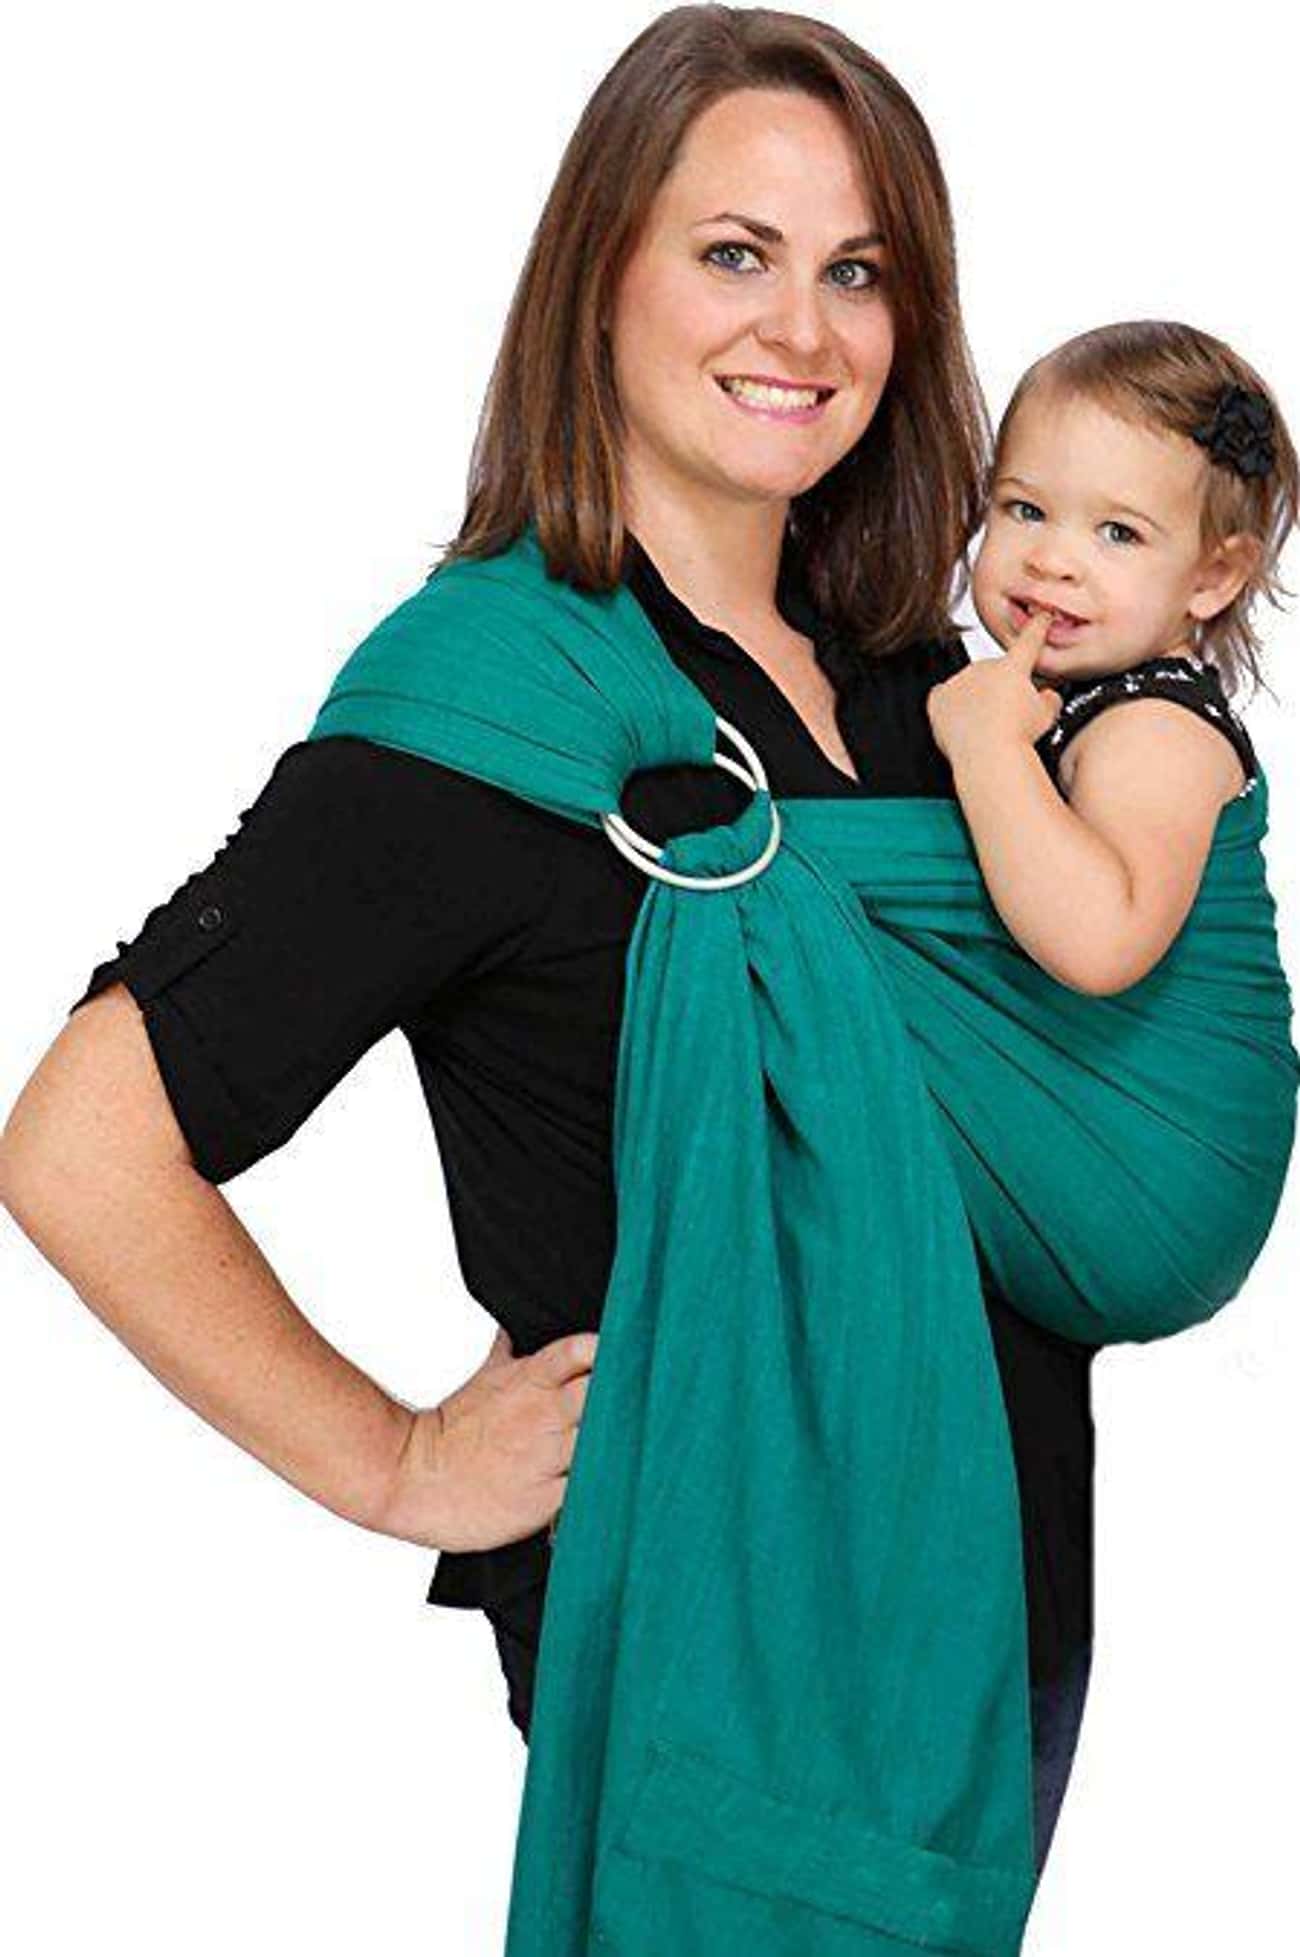 A Hands-Free Baby Sling